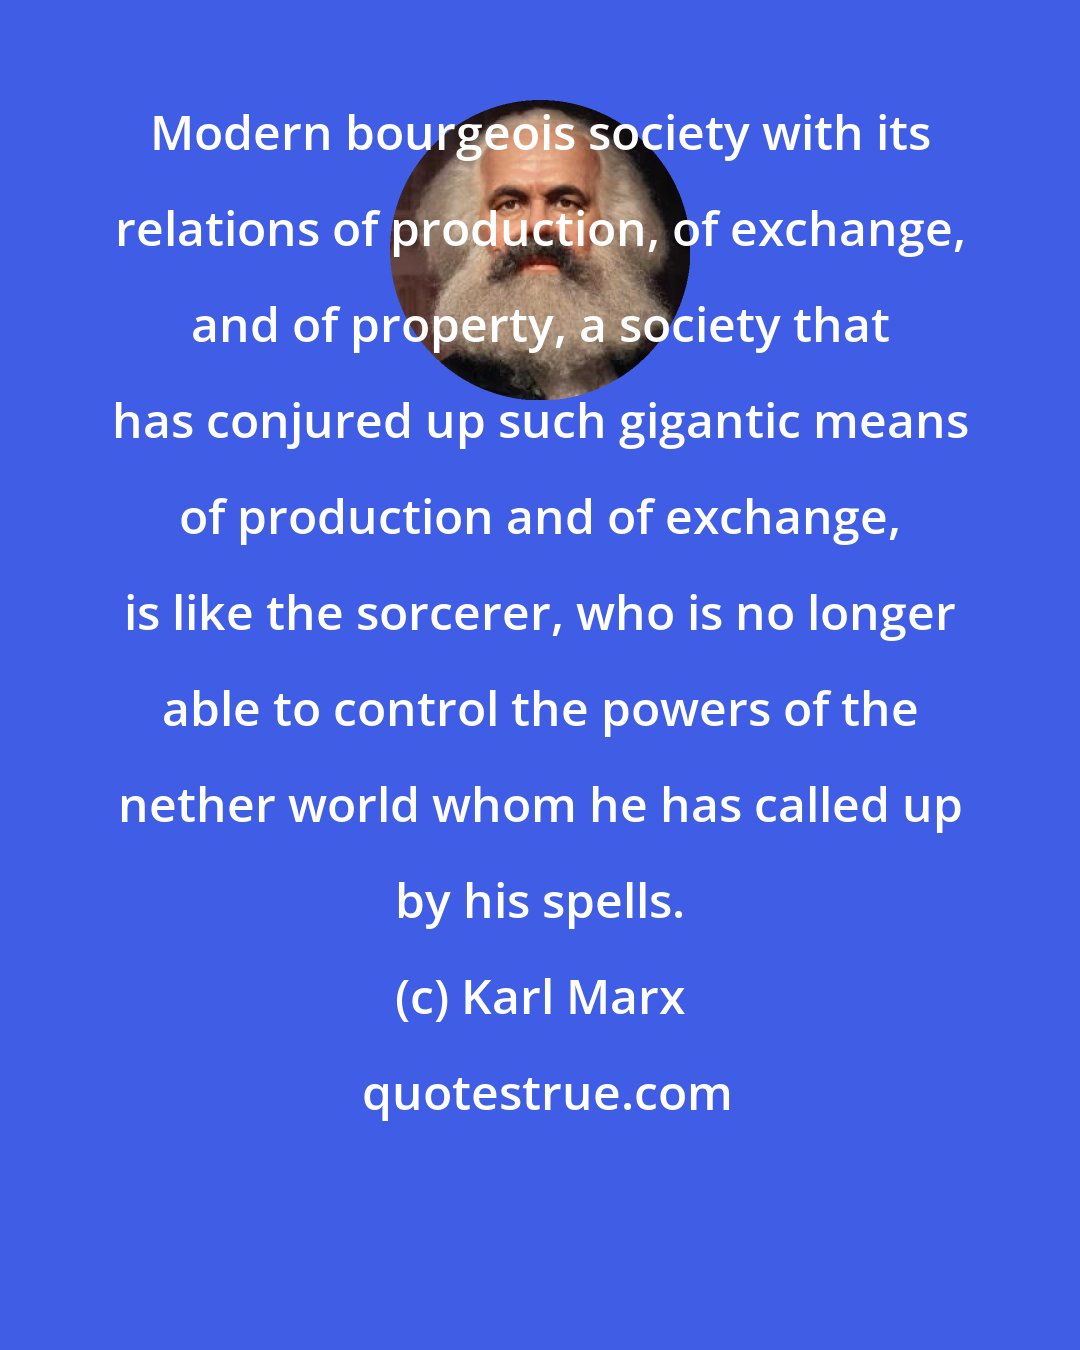 Karl Marx: Modern bourgeois society with its relations of production, of exchange, and of property, a society that has conjured up such gigantic means of production and of exchange, is like the sorcerer, who is no longer able to control the powers of the nether world whom he has called up by his spells.